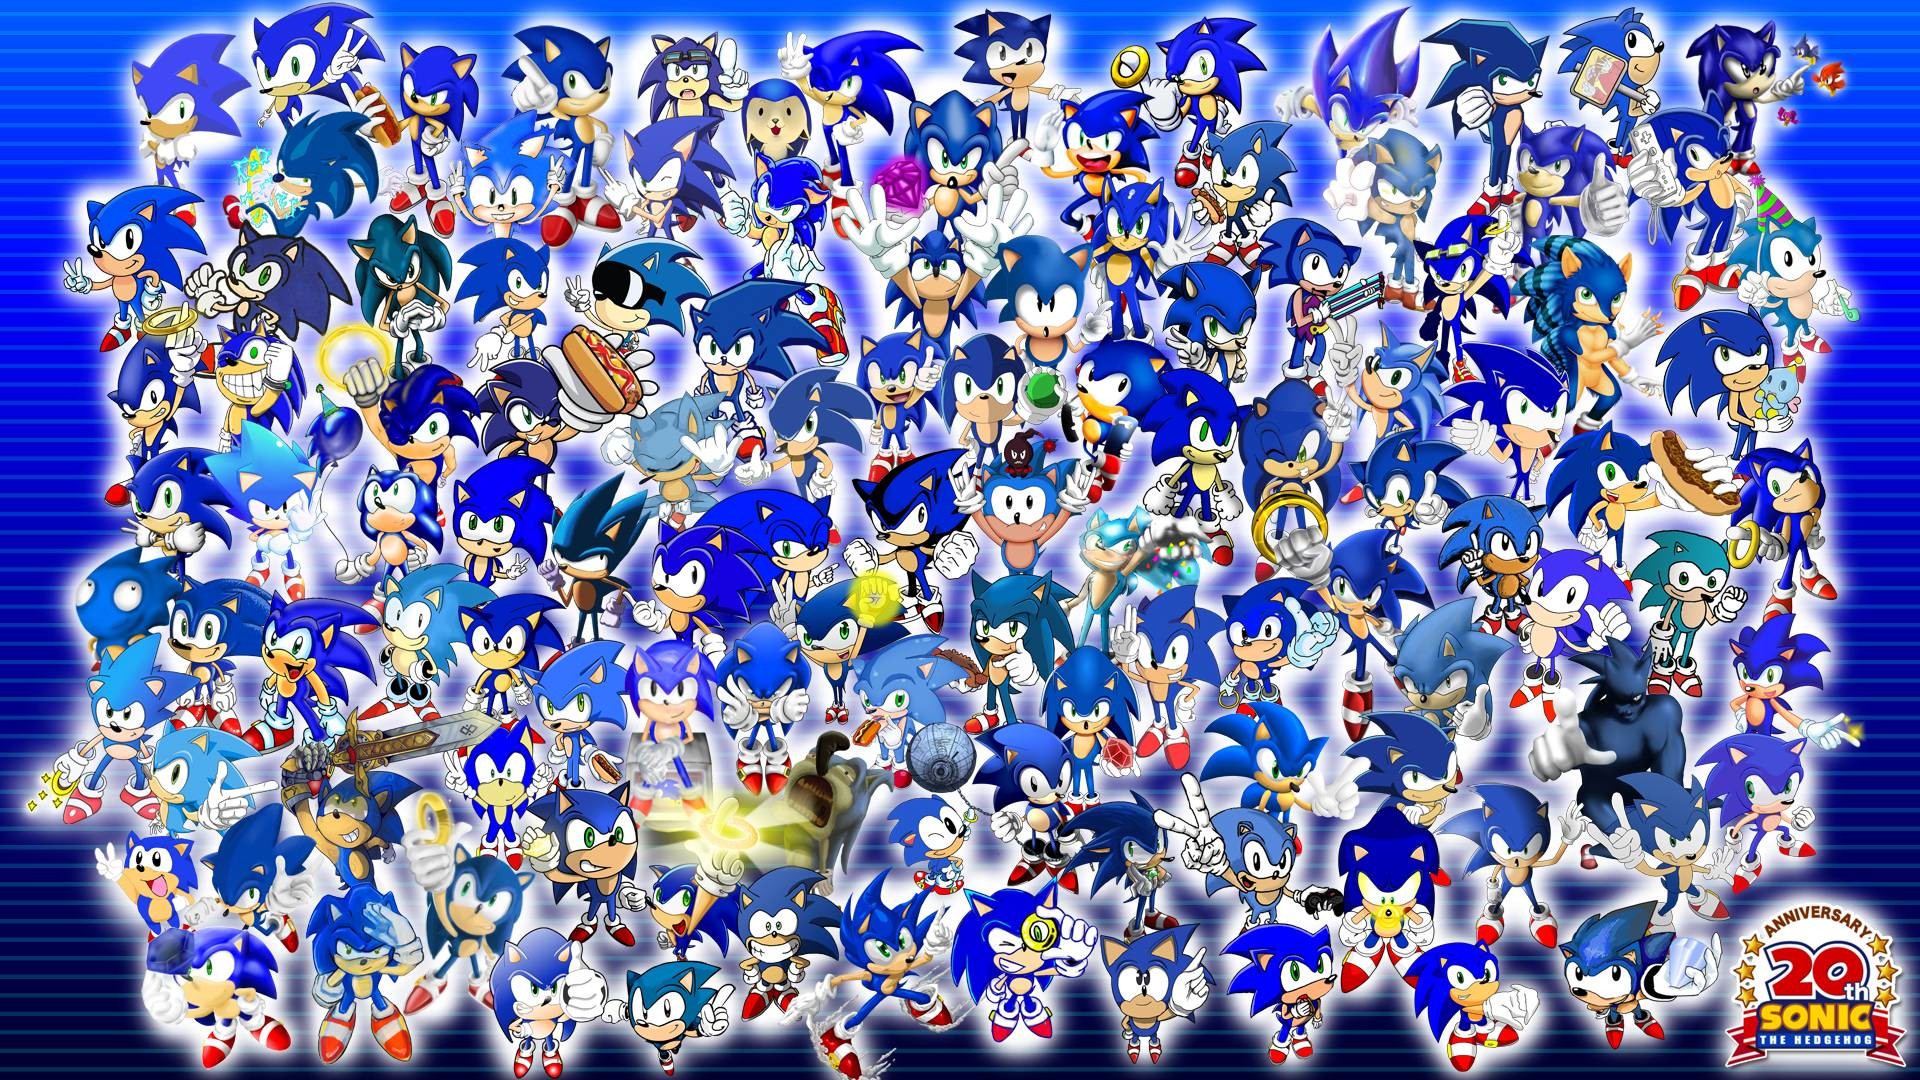 1920x1080 Sonic The Hedgehog Backgrounds - Wallpaper Cave